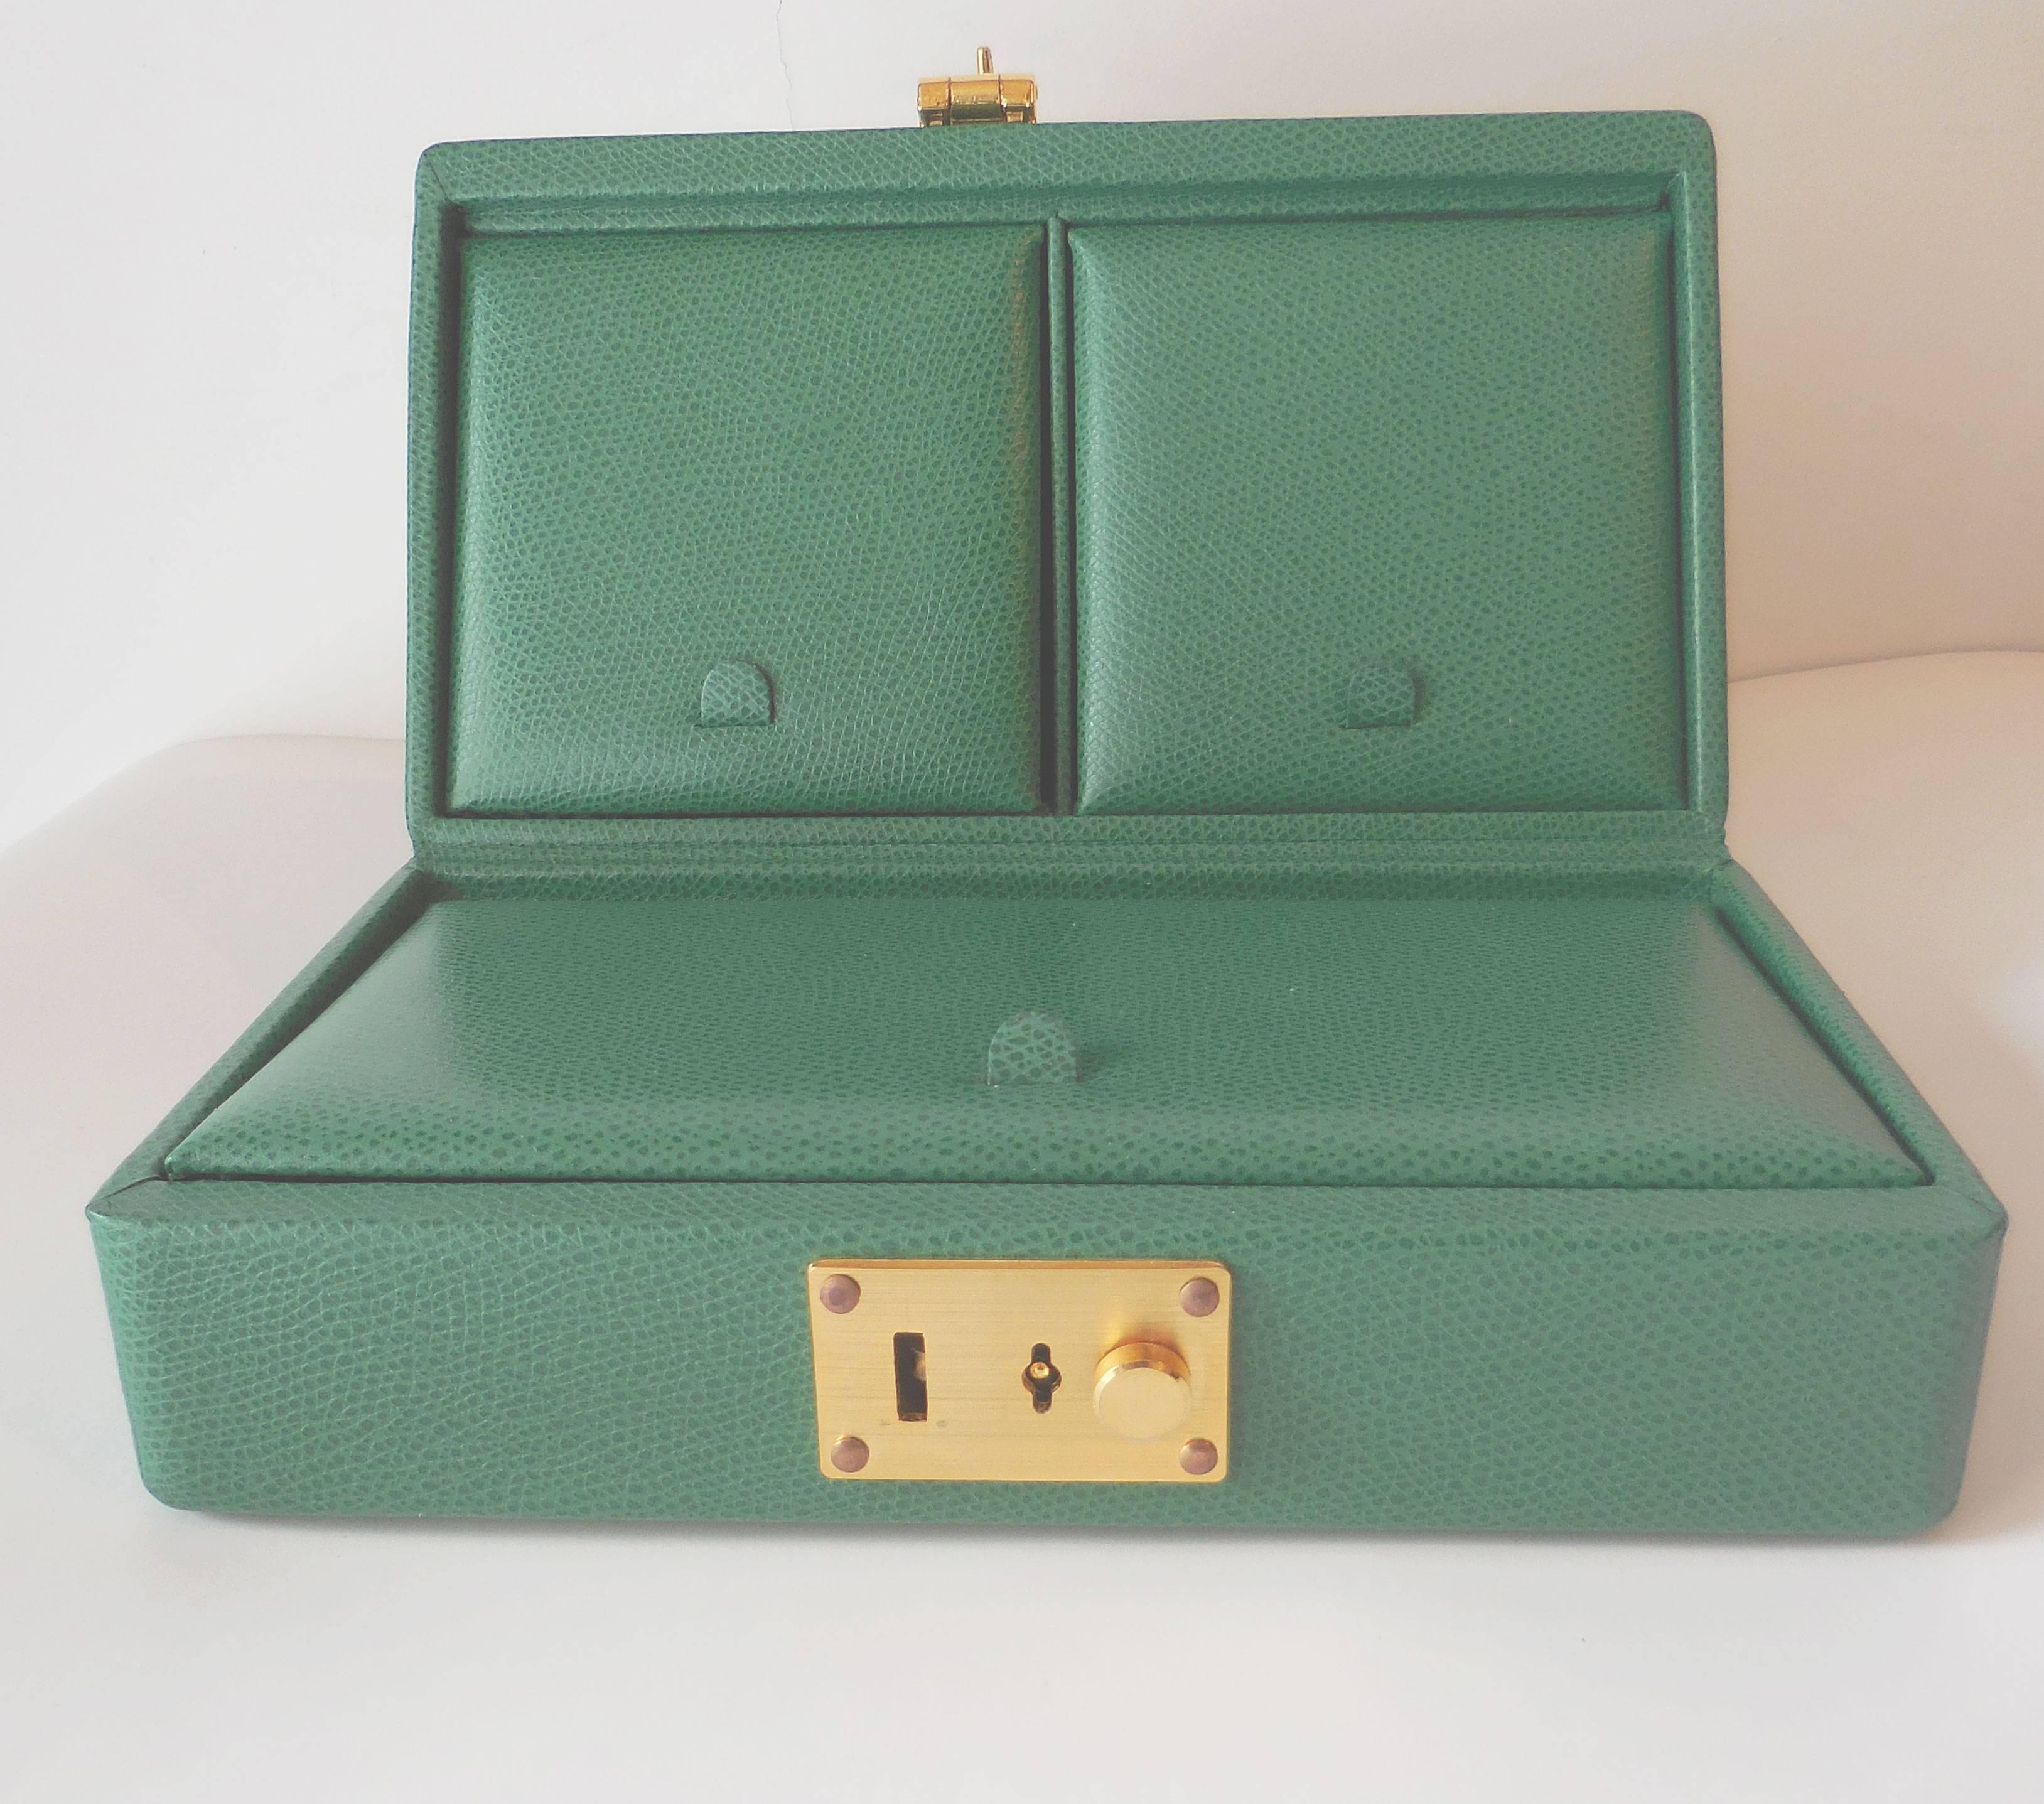 Curating luxury withTanner Krolle green leather jewelry box, a perfect size for travel! The three separate compartments are fitted with dark green velvet linings and protectors. Fitted with lock and key. An exceptional gift for that very special